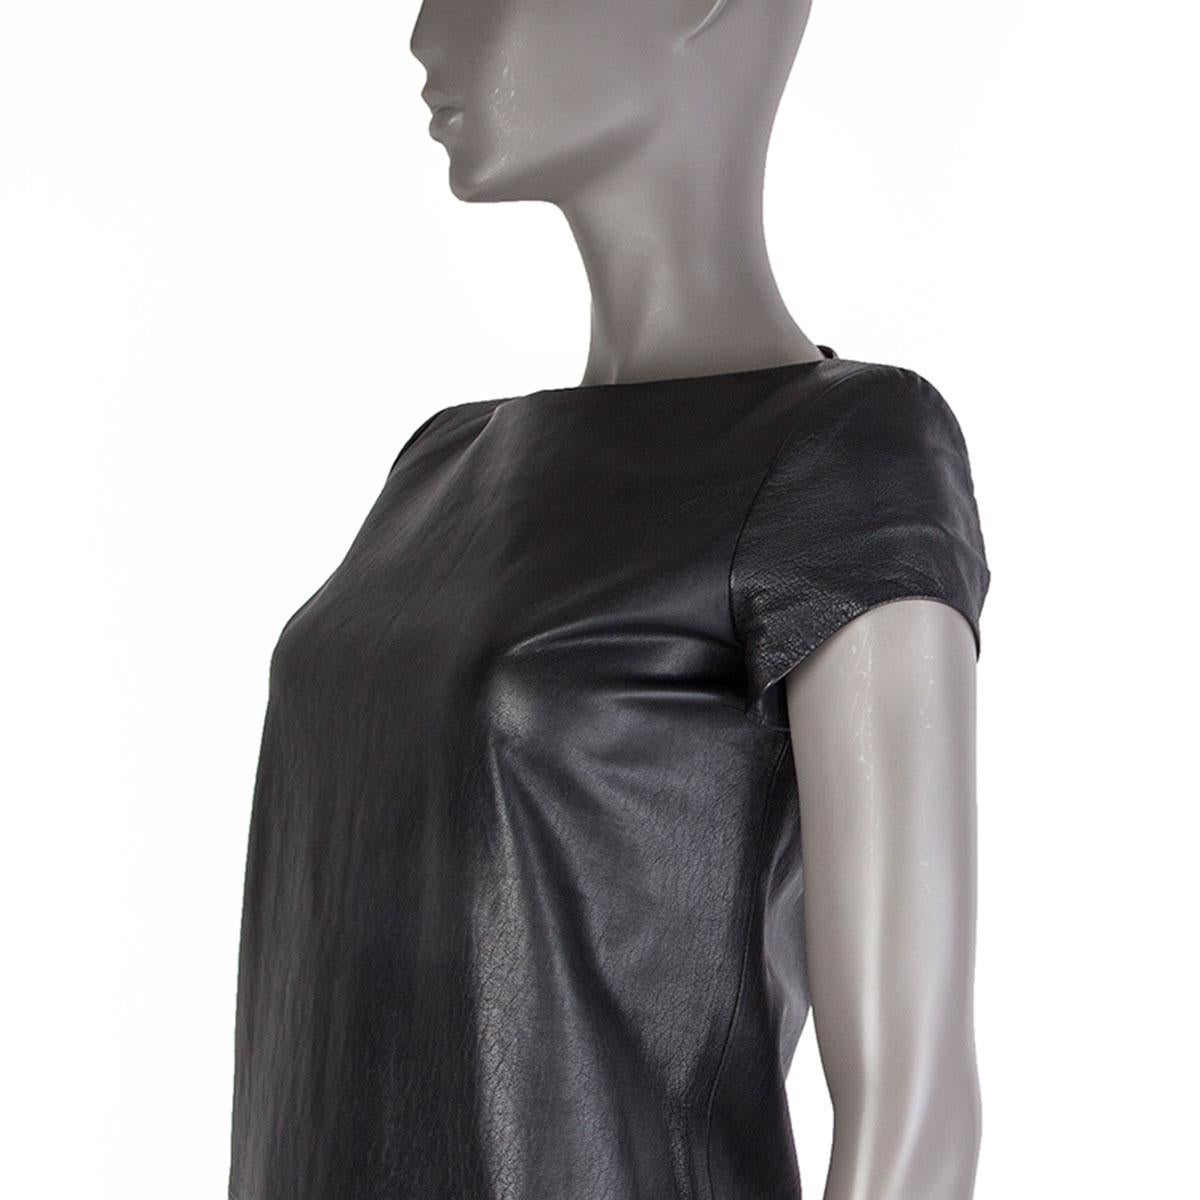 100% authentic Saint Laurent short-sleeve shit dress in black leather. Opens with zipper on the back. Lined in black silk (100%). Has been worn and is in excellent condition.

Tag Size	Missing Tag (S) 
Size	S
Shoulder Width	38cm (14.8in)
Bust